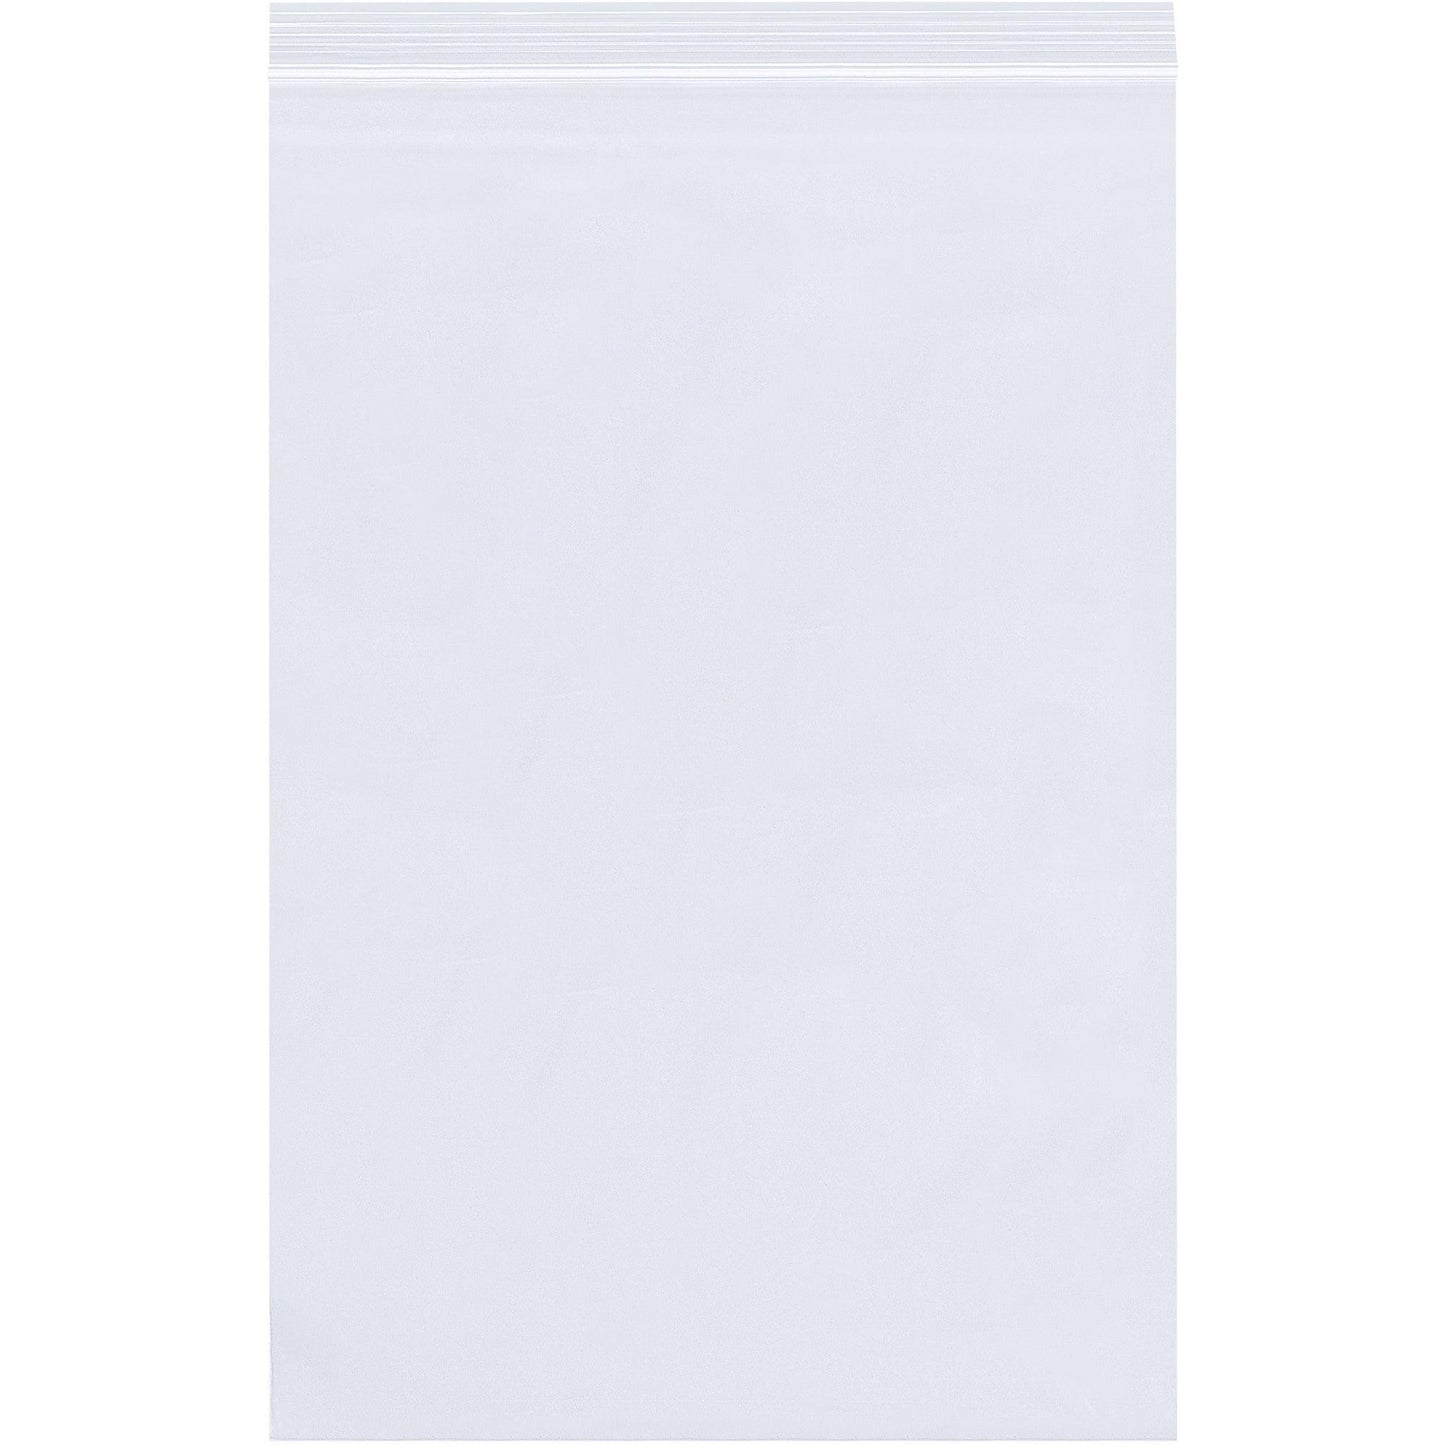 12 x 18" - 6 Mil Reclosable Poly Bags - PB3890